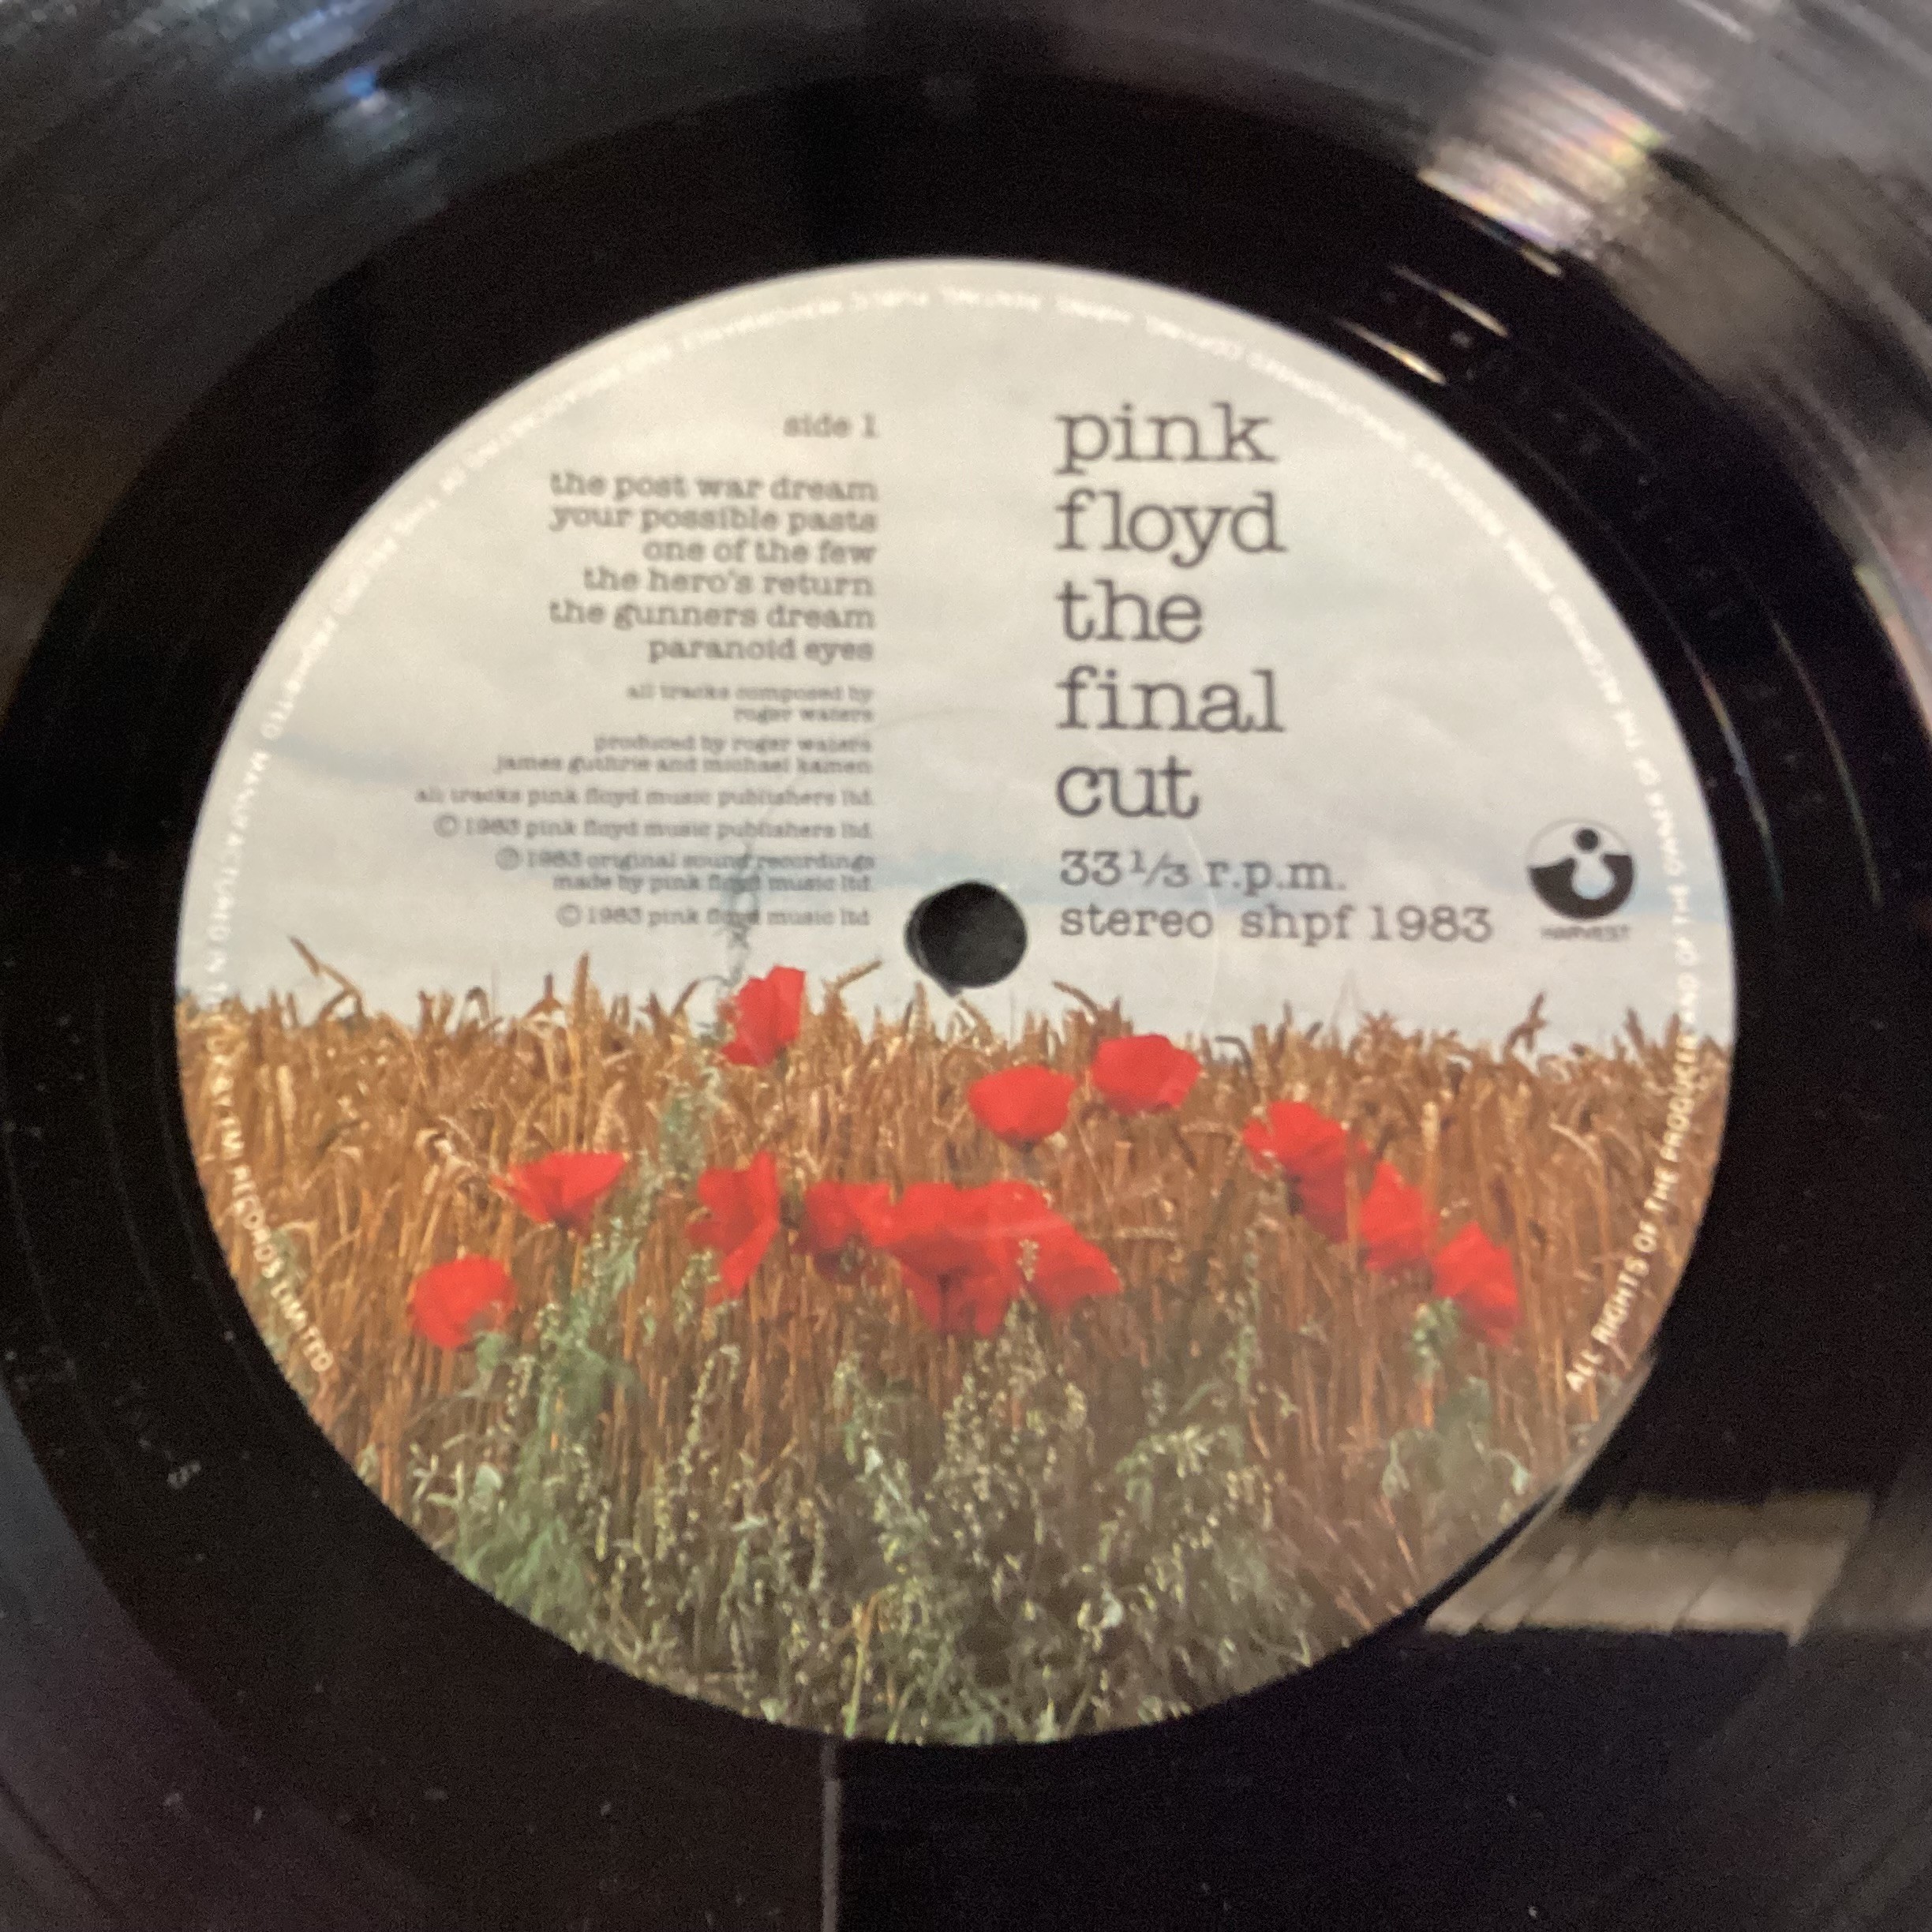 PINK FLOYD VINYL LP RECORDS X 2. Copies here include ‘The Wall’ double album on Harvest SHDW 411 - Image 9 of 9